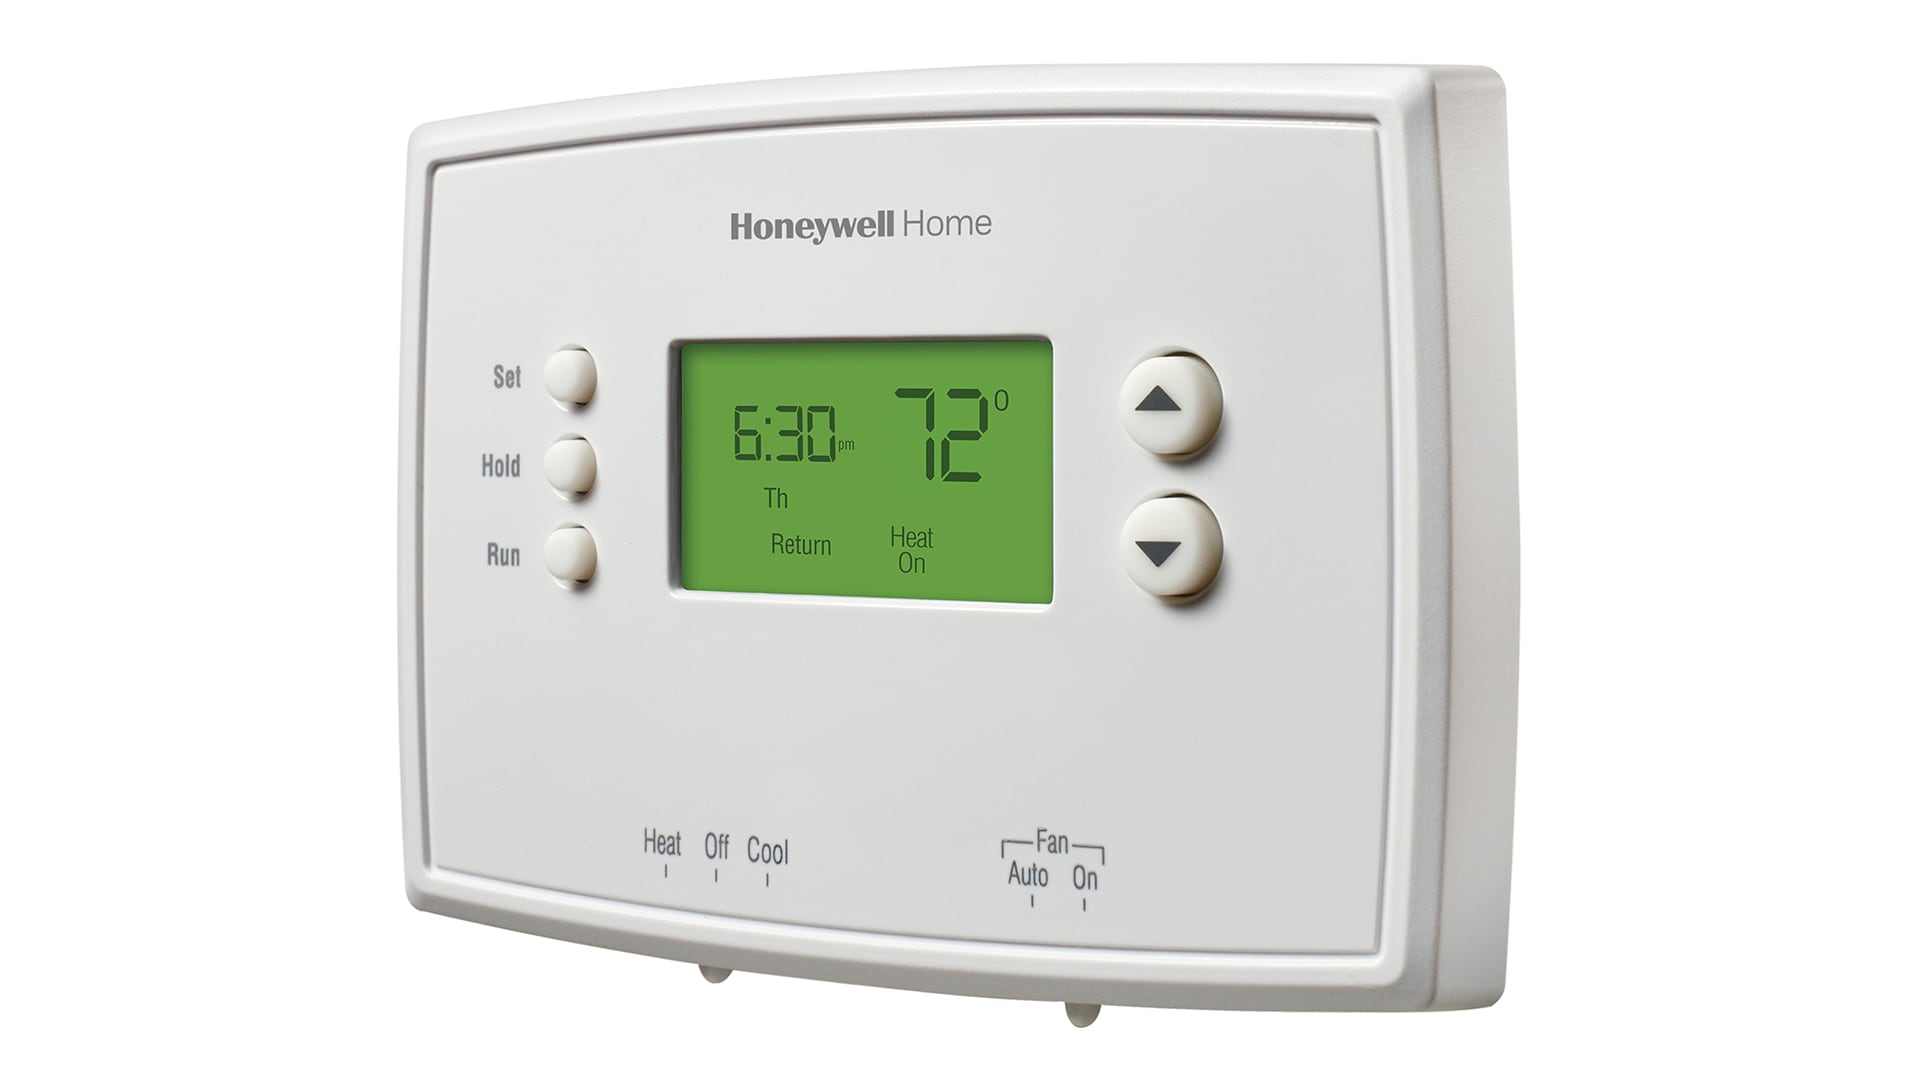 Honeywell Home RTH2300B 24-Volt 5-2 Day Programmable Thermostat